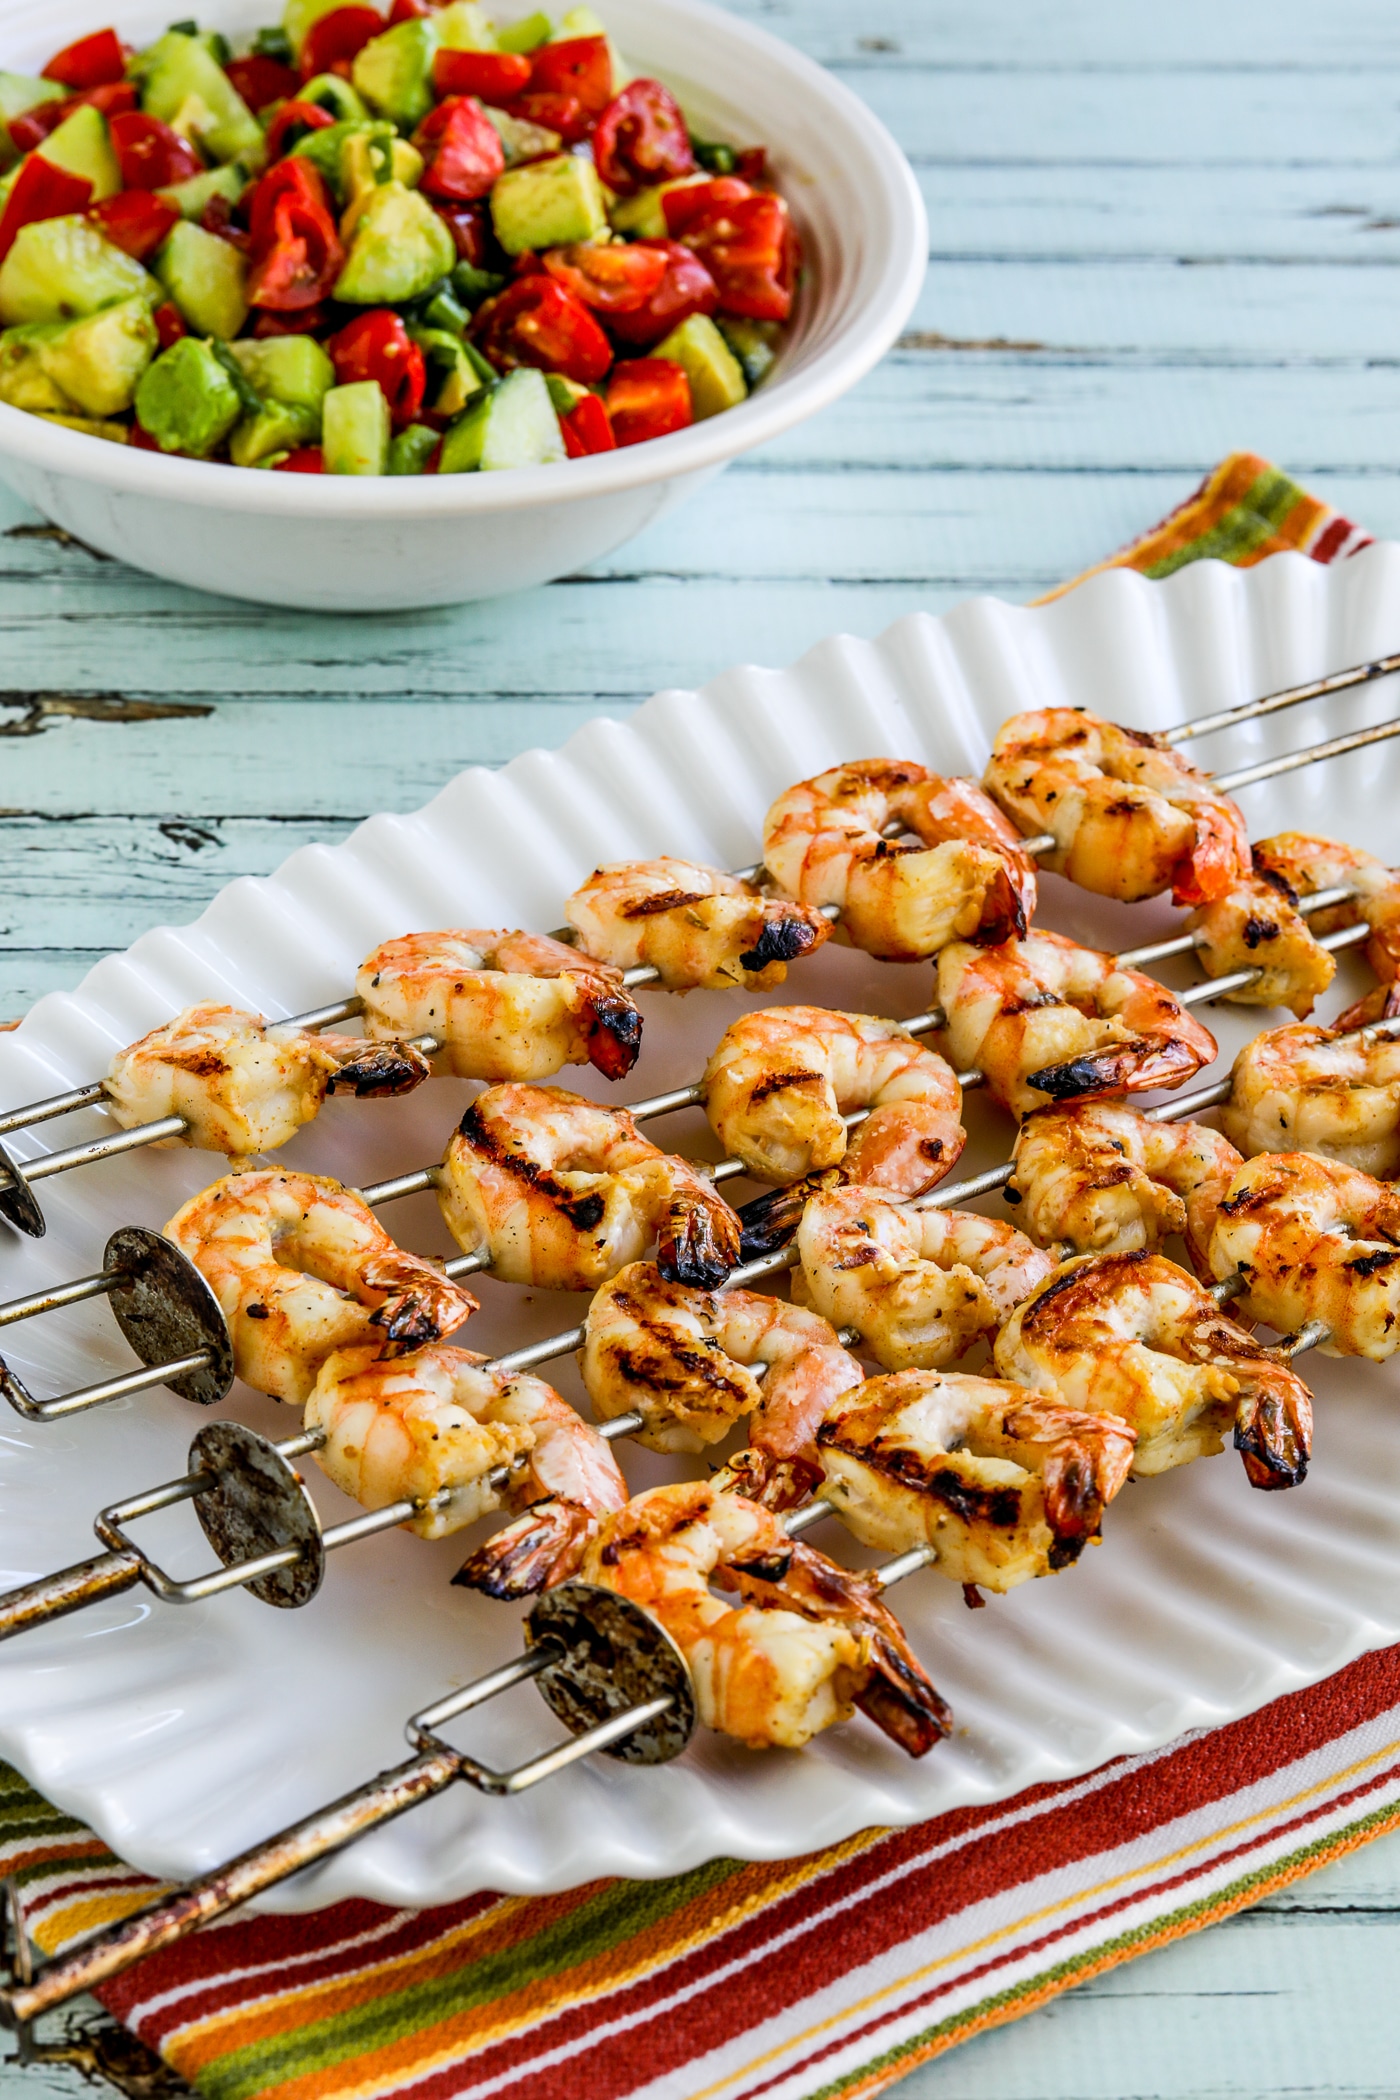 Grilled shrimp skewers on a serving plate with sauce in a bowl